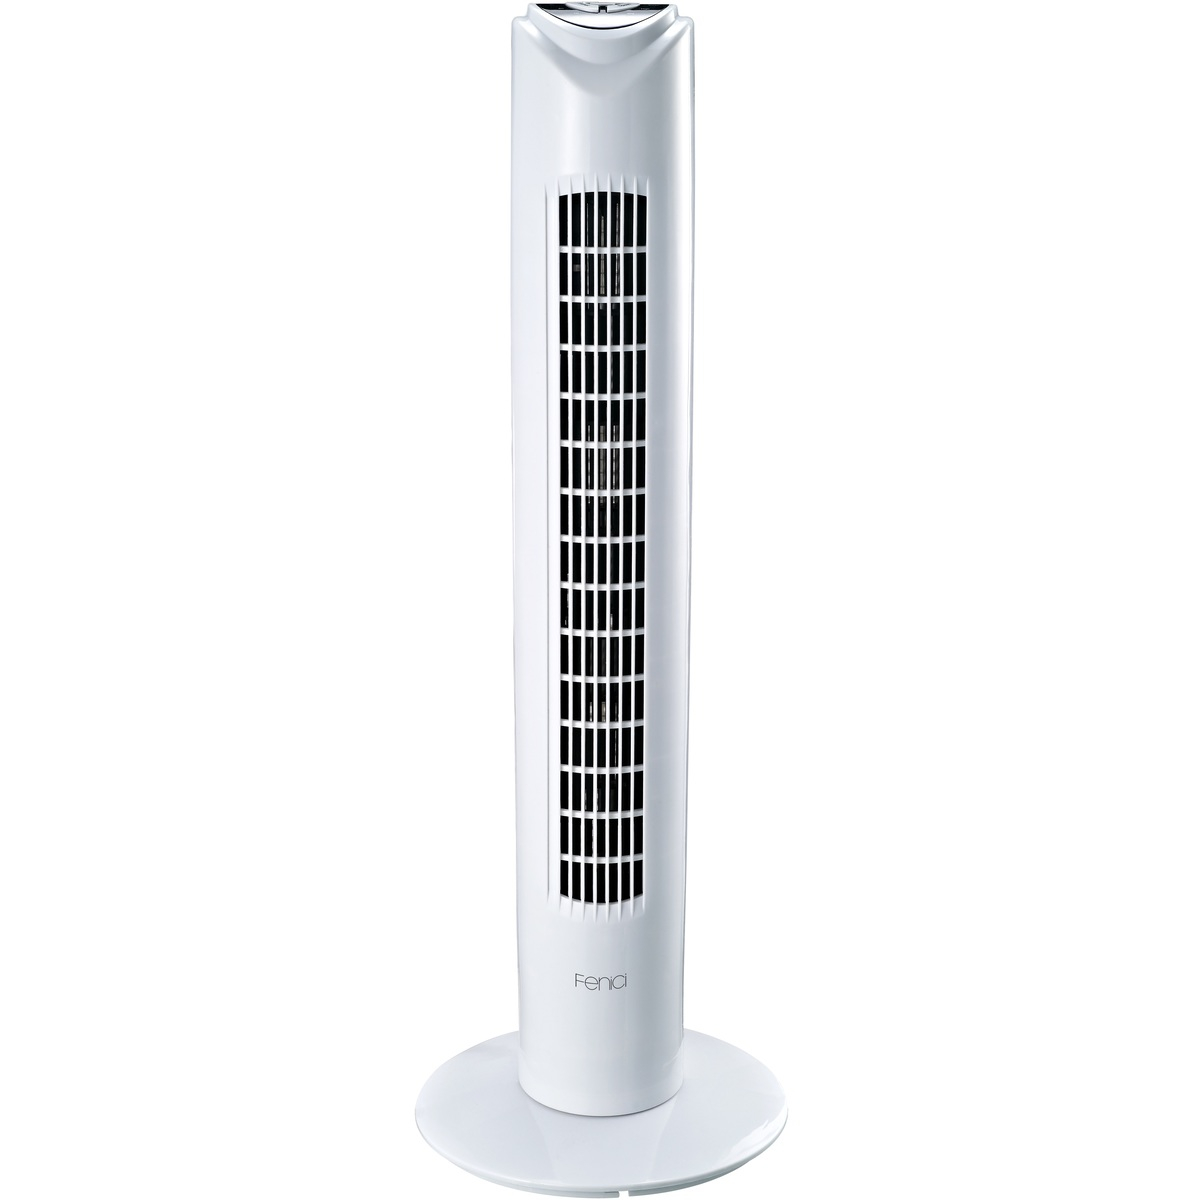 Fenici 80cm Tower Fan With Remote Control White Fyf29rb pertaining to sizing 1200 X 1200